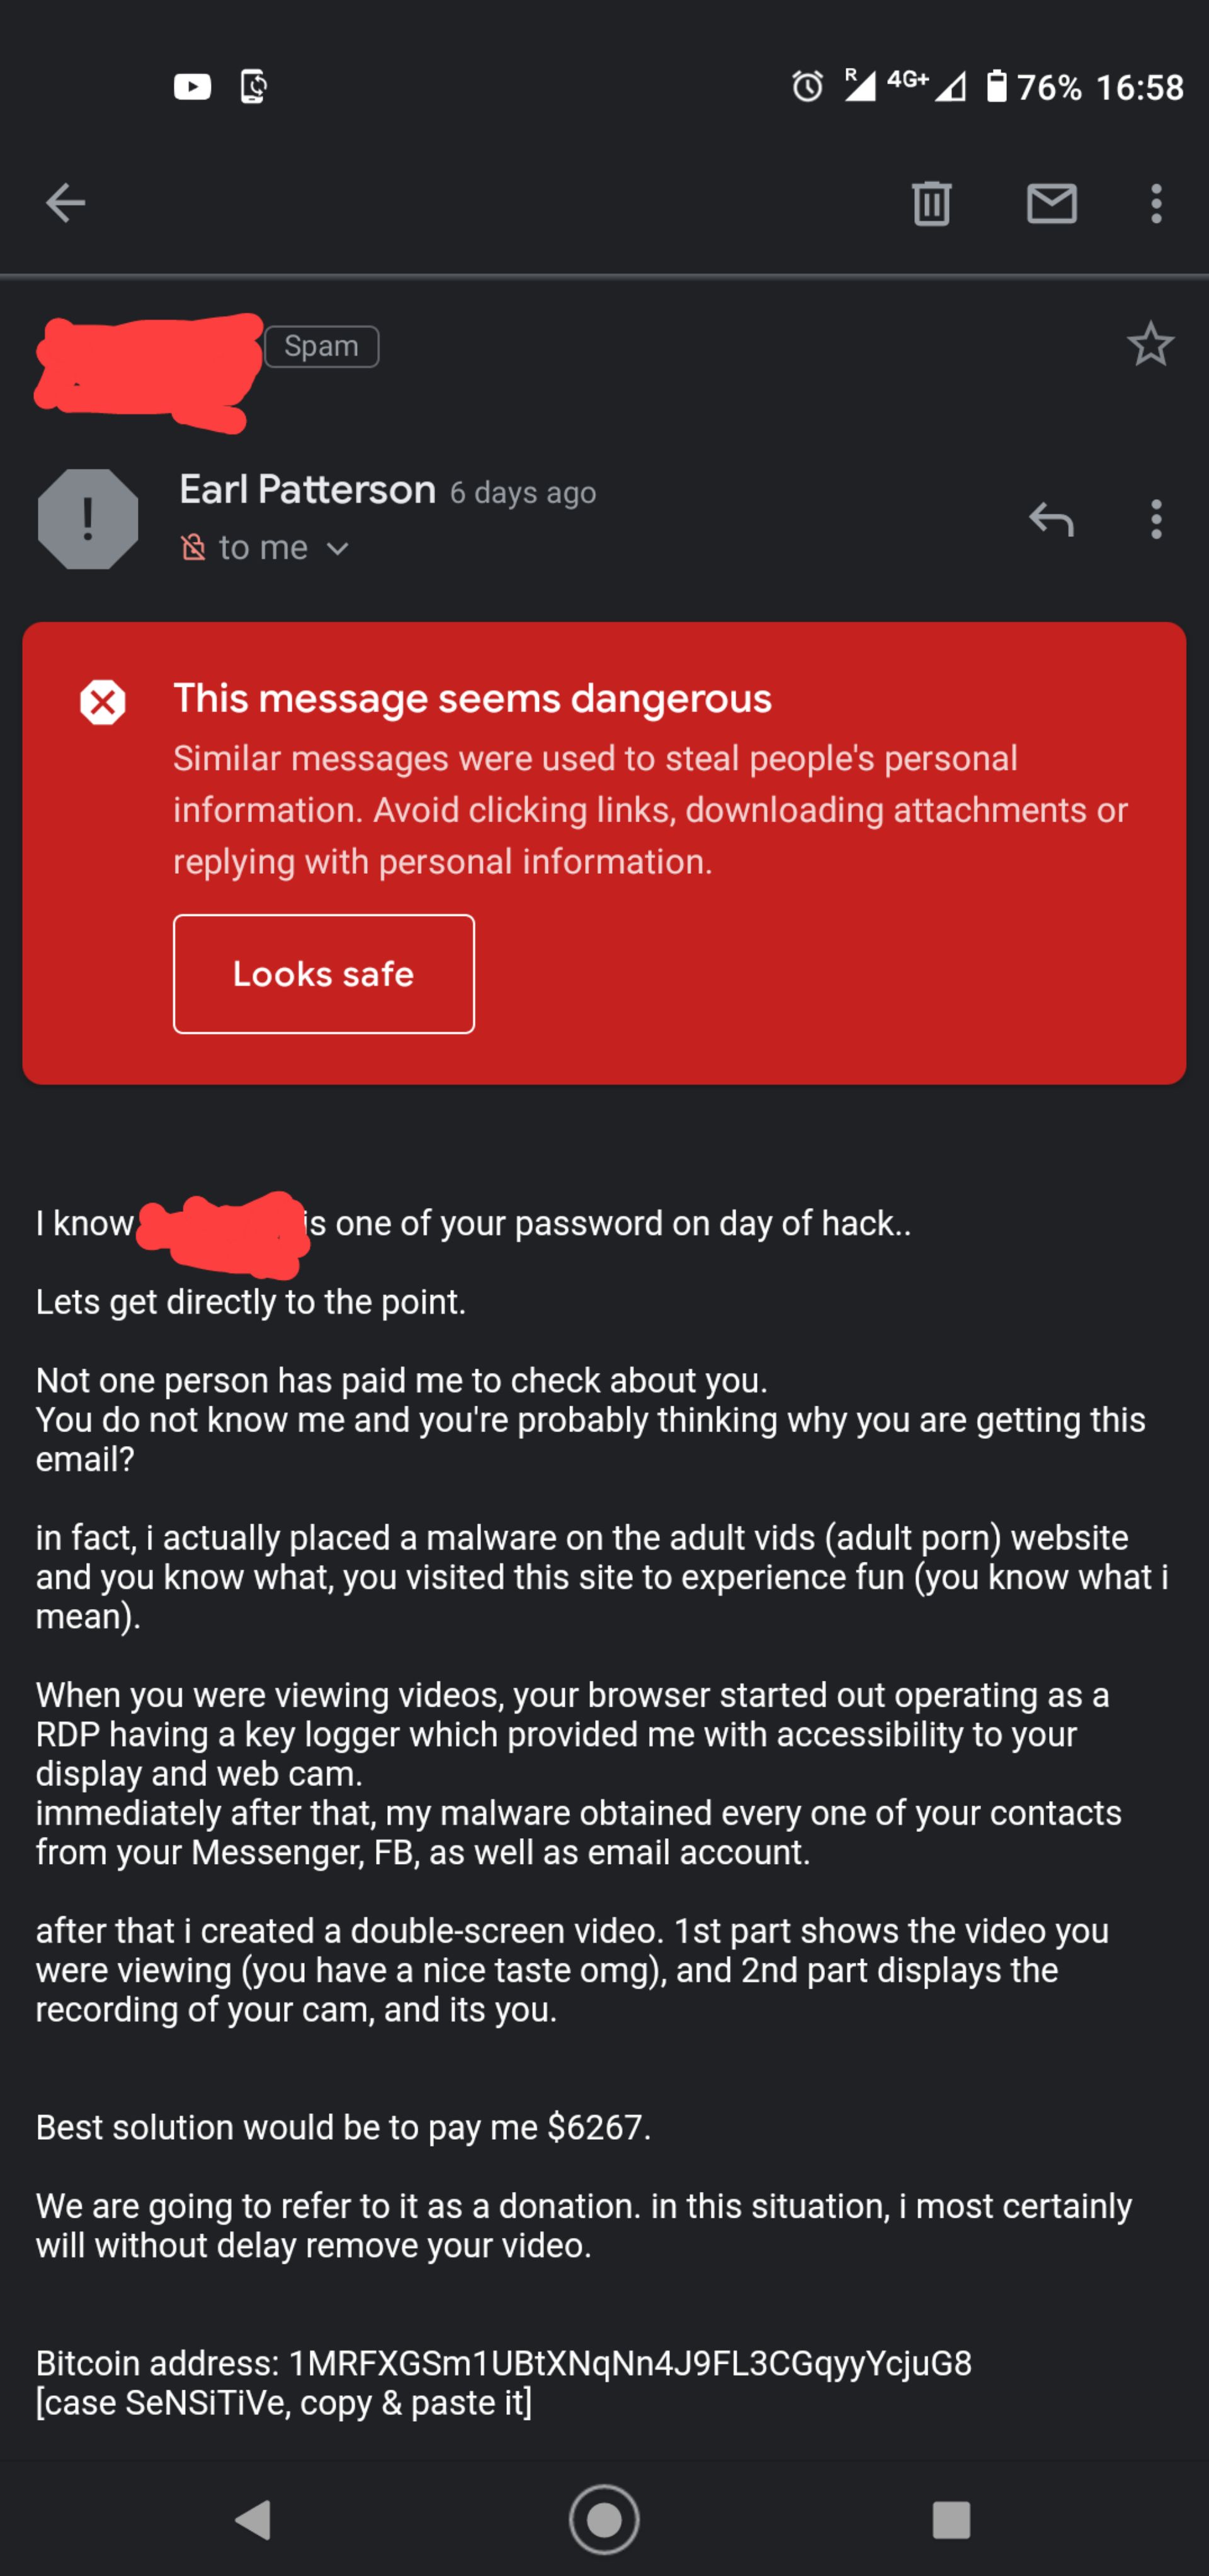 Anyone else recieving password threats in email with the actual password?